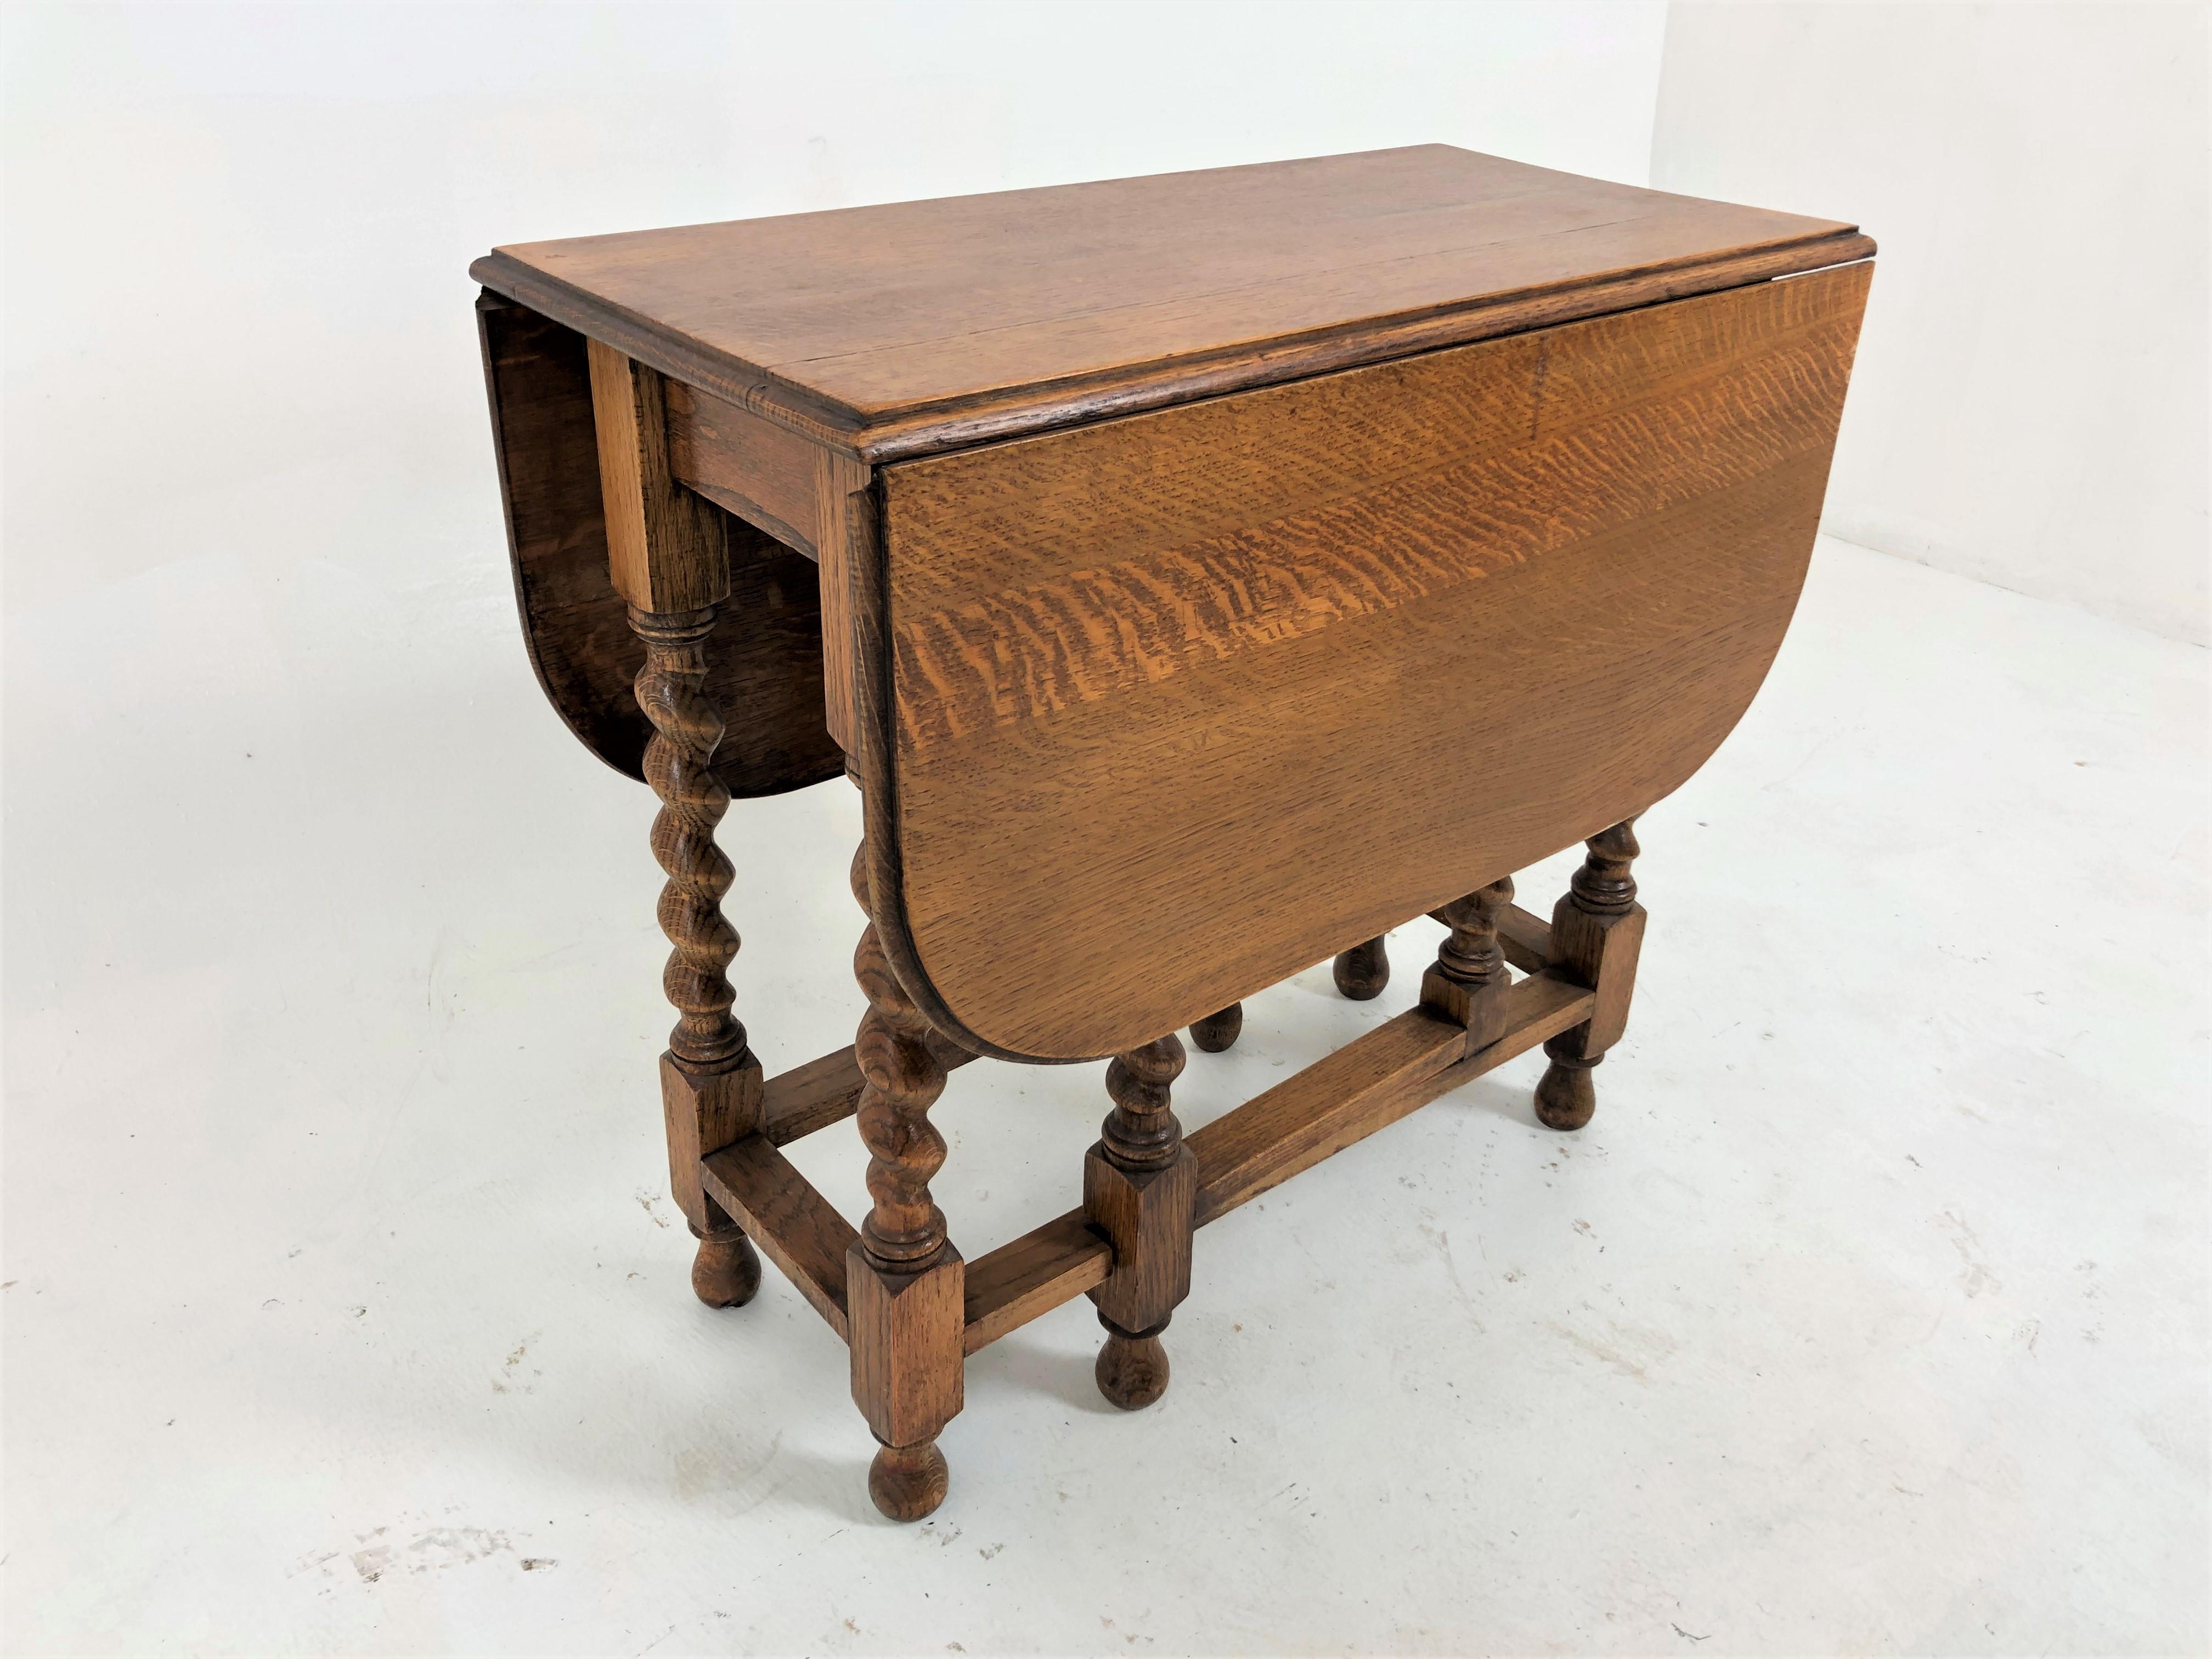 Antique oak barley Twist Gateleg table, drop leaf table, Scotland 1920, H757

Scotland 1920
Solid Oak
Original finish
Oak gateleg table with moulded edge
Pair of leaves to the side
All standing on very thick barley twist legs
Connected with